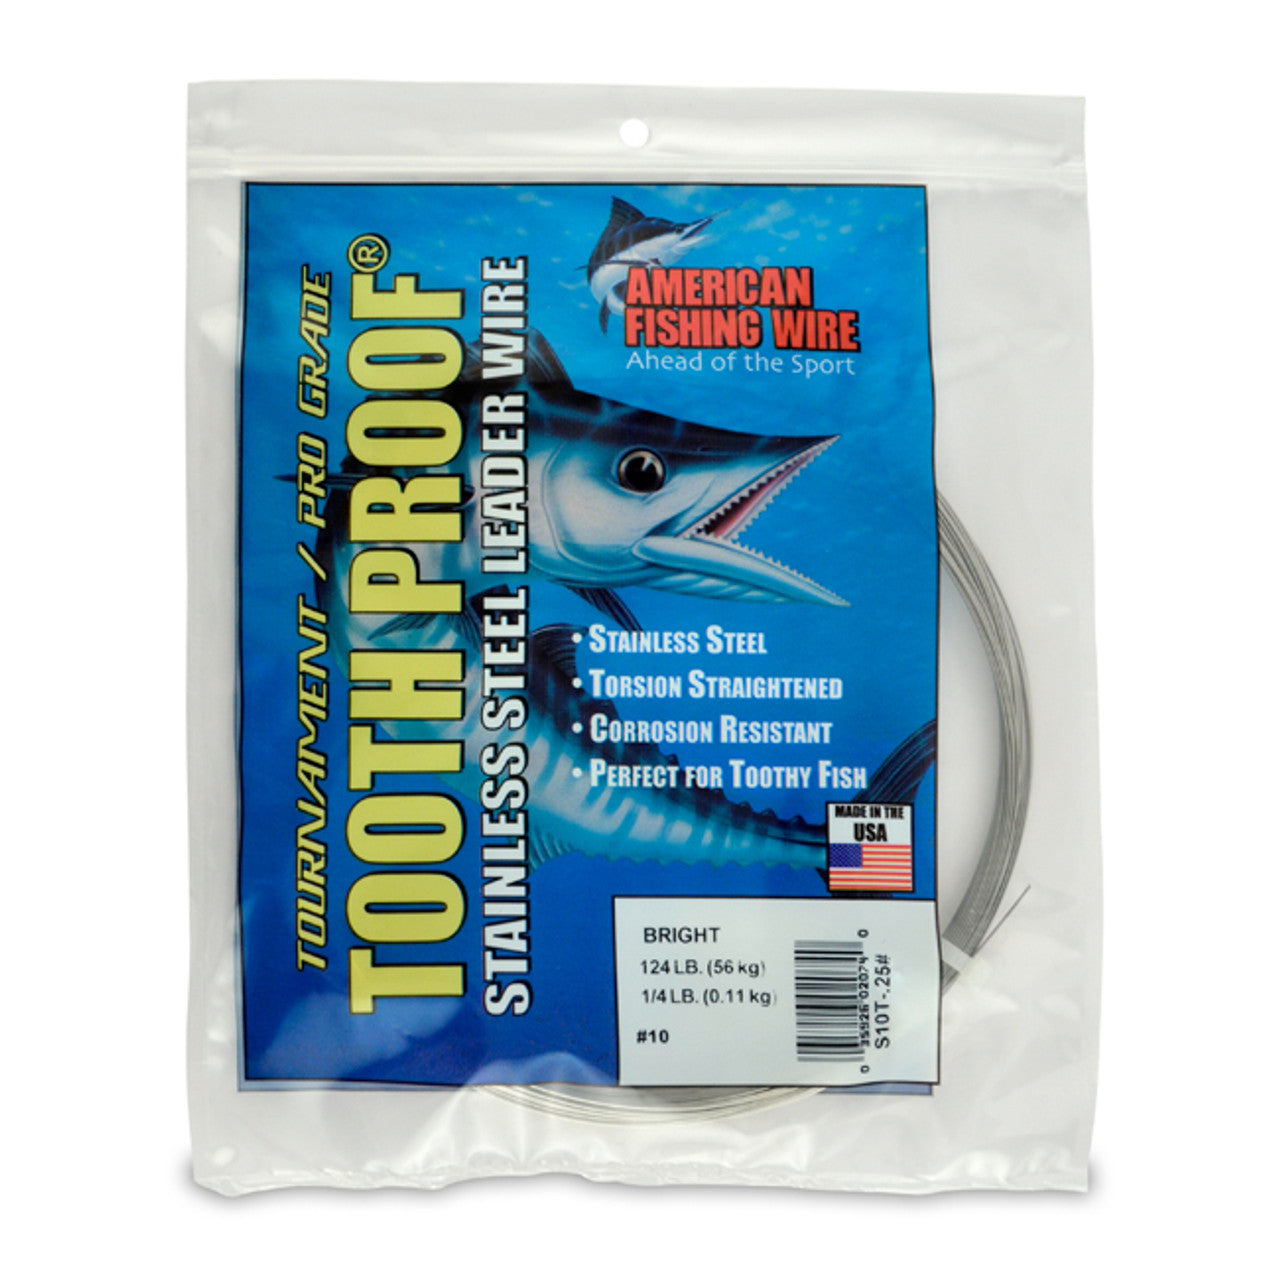 AFW Tooth Proof Stainless Steel Leader Single Strand Wire 124lb Test 30ft Bright